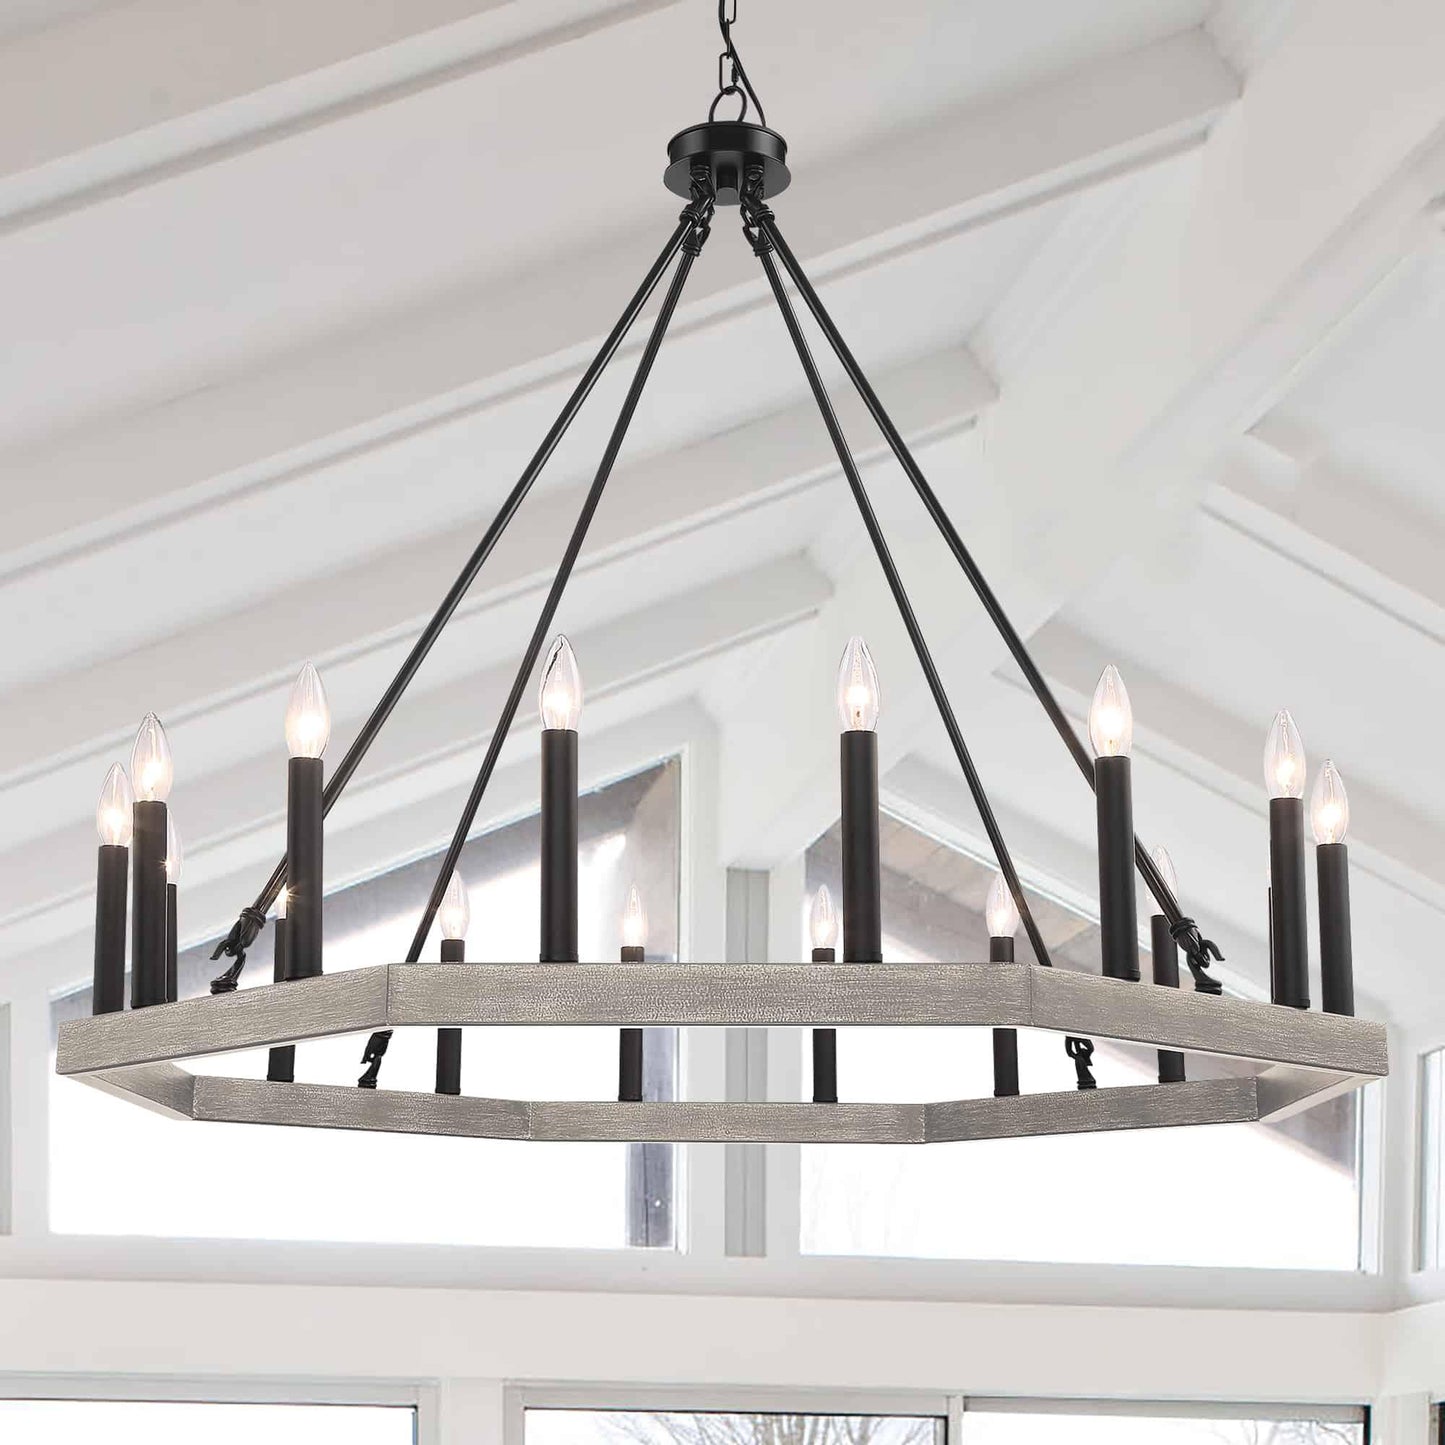 16 light candle style wagon wheel chandelier 1 (2) by ACROMA